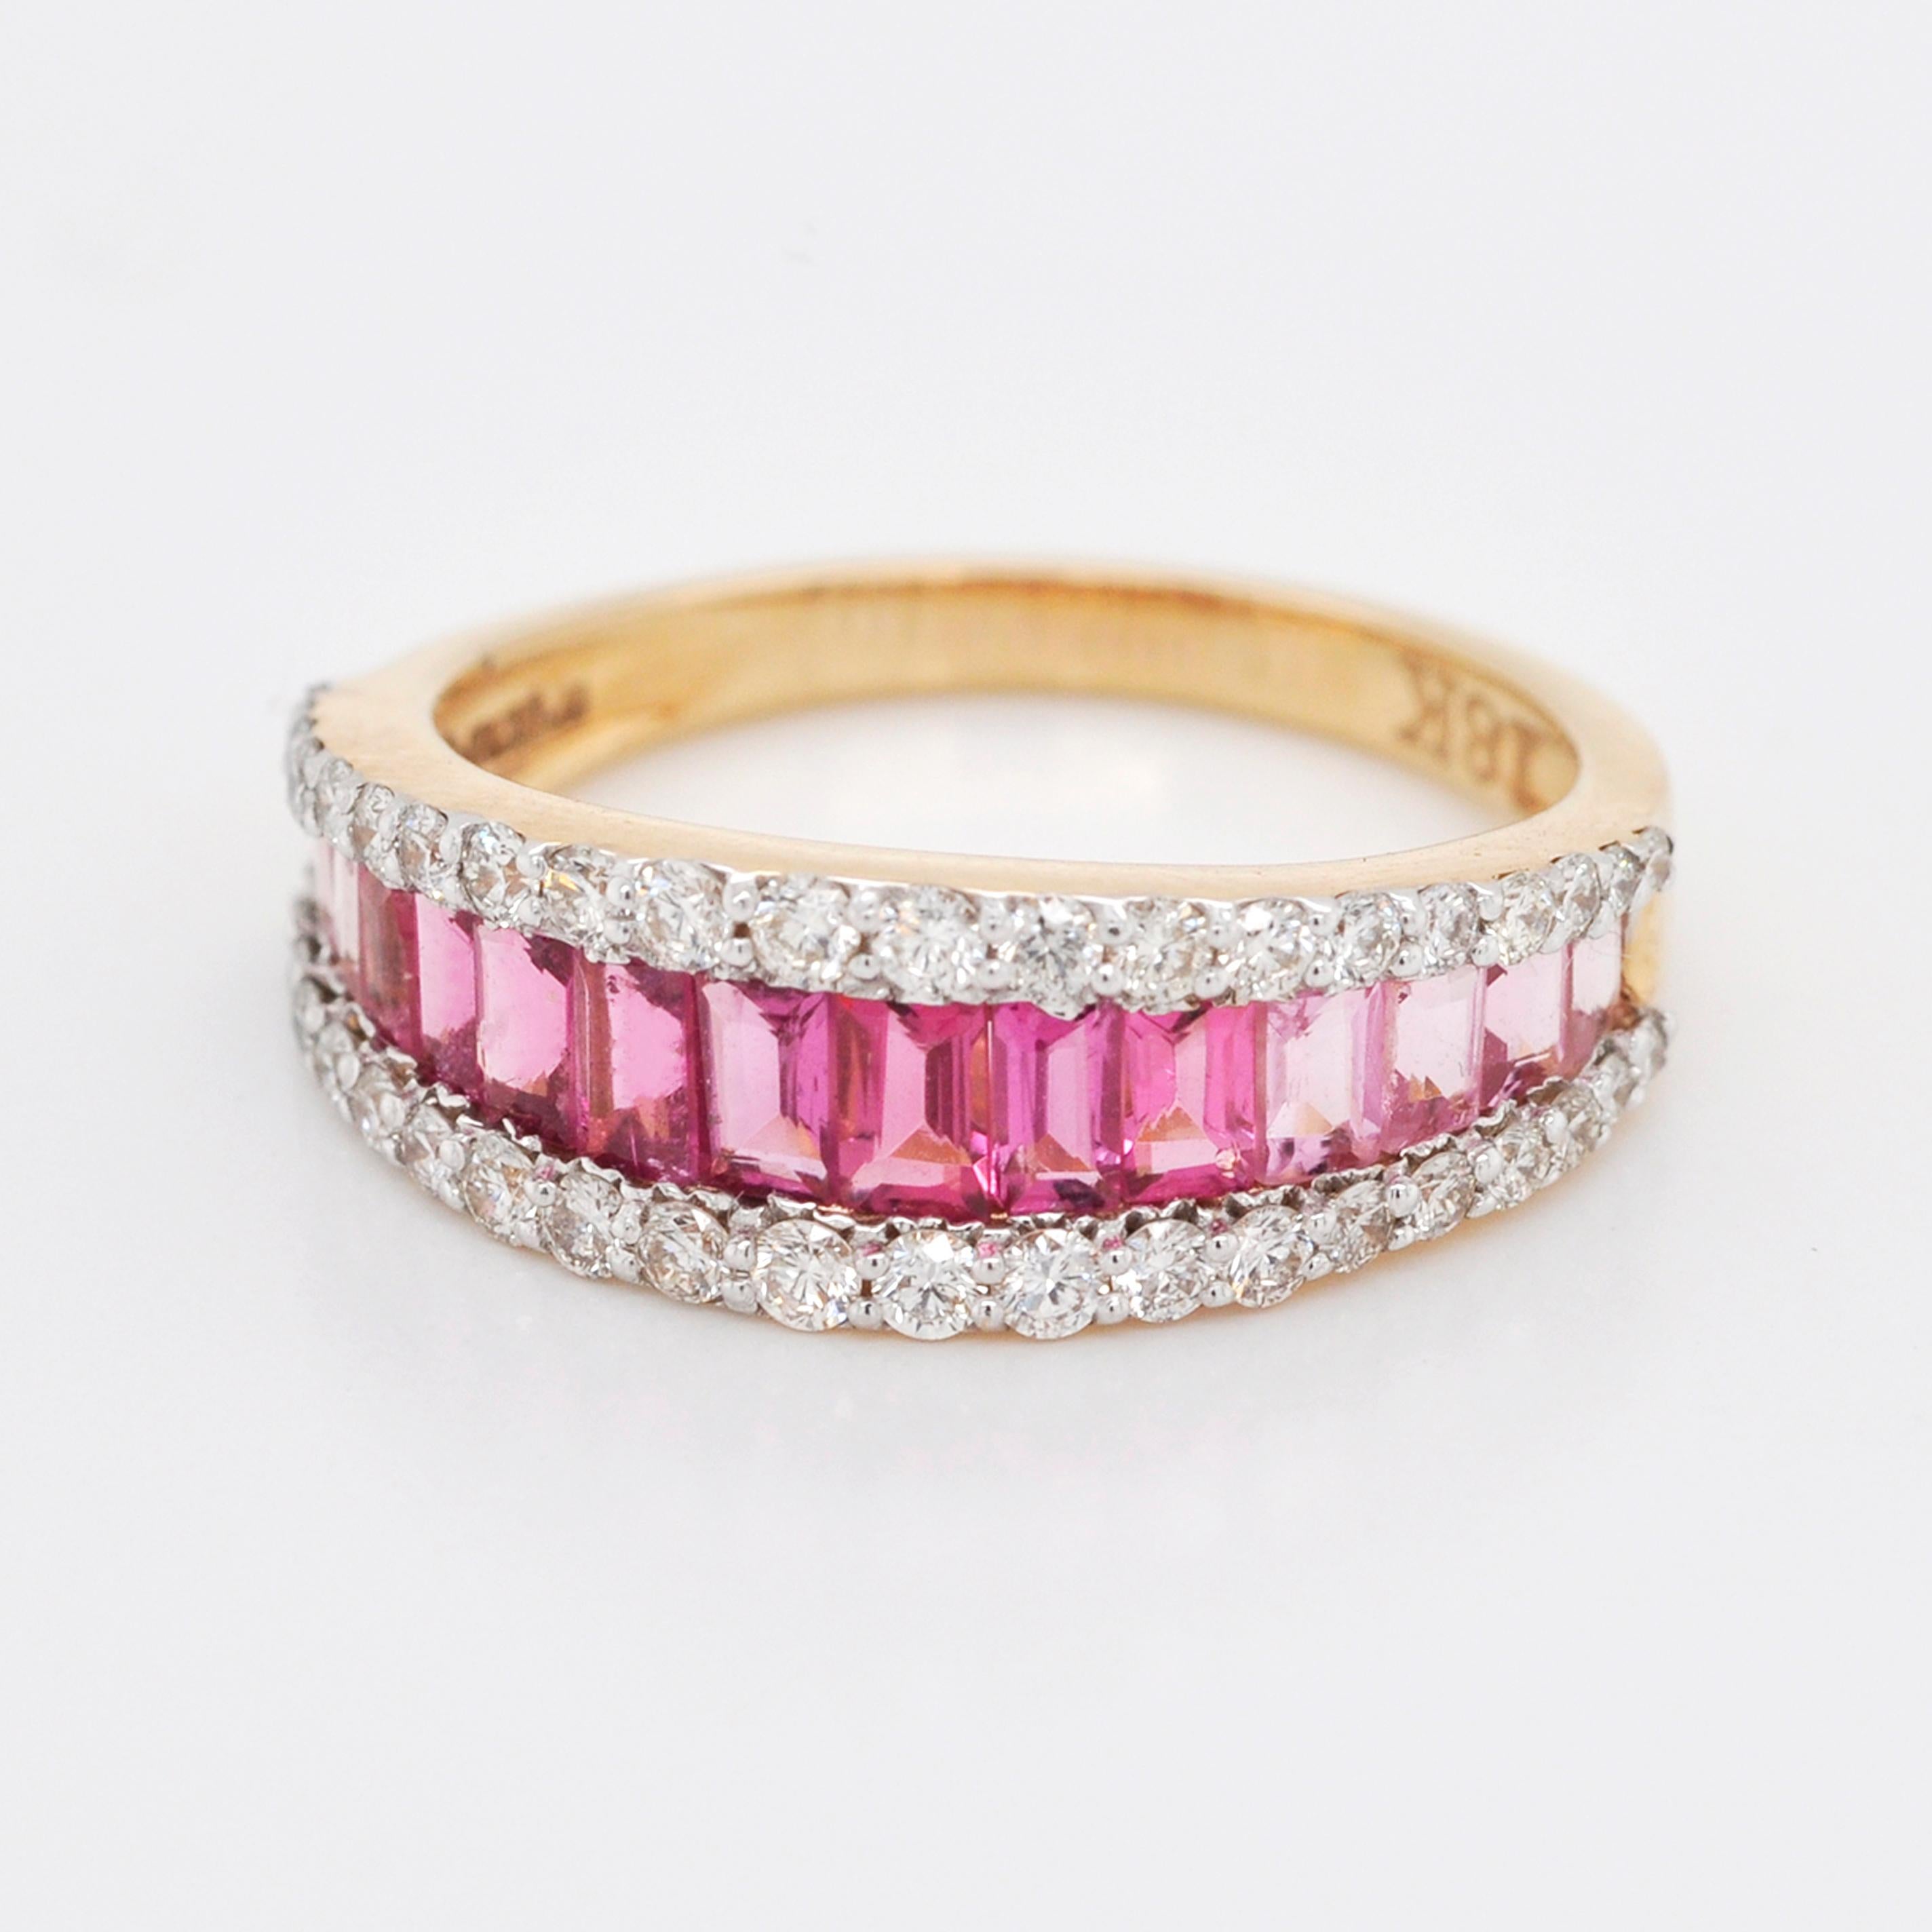 18 Karat Gold Pink Tourmaline Baguette Diamond Contemporary Wedding Band Ring In New Condition For Sale In Jaipur, Rajasthan